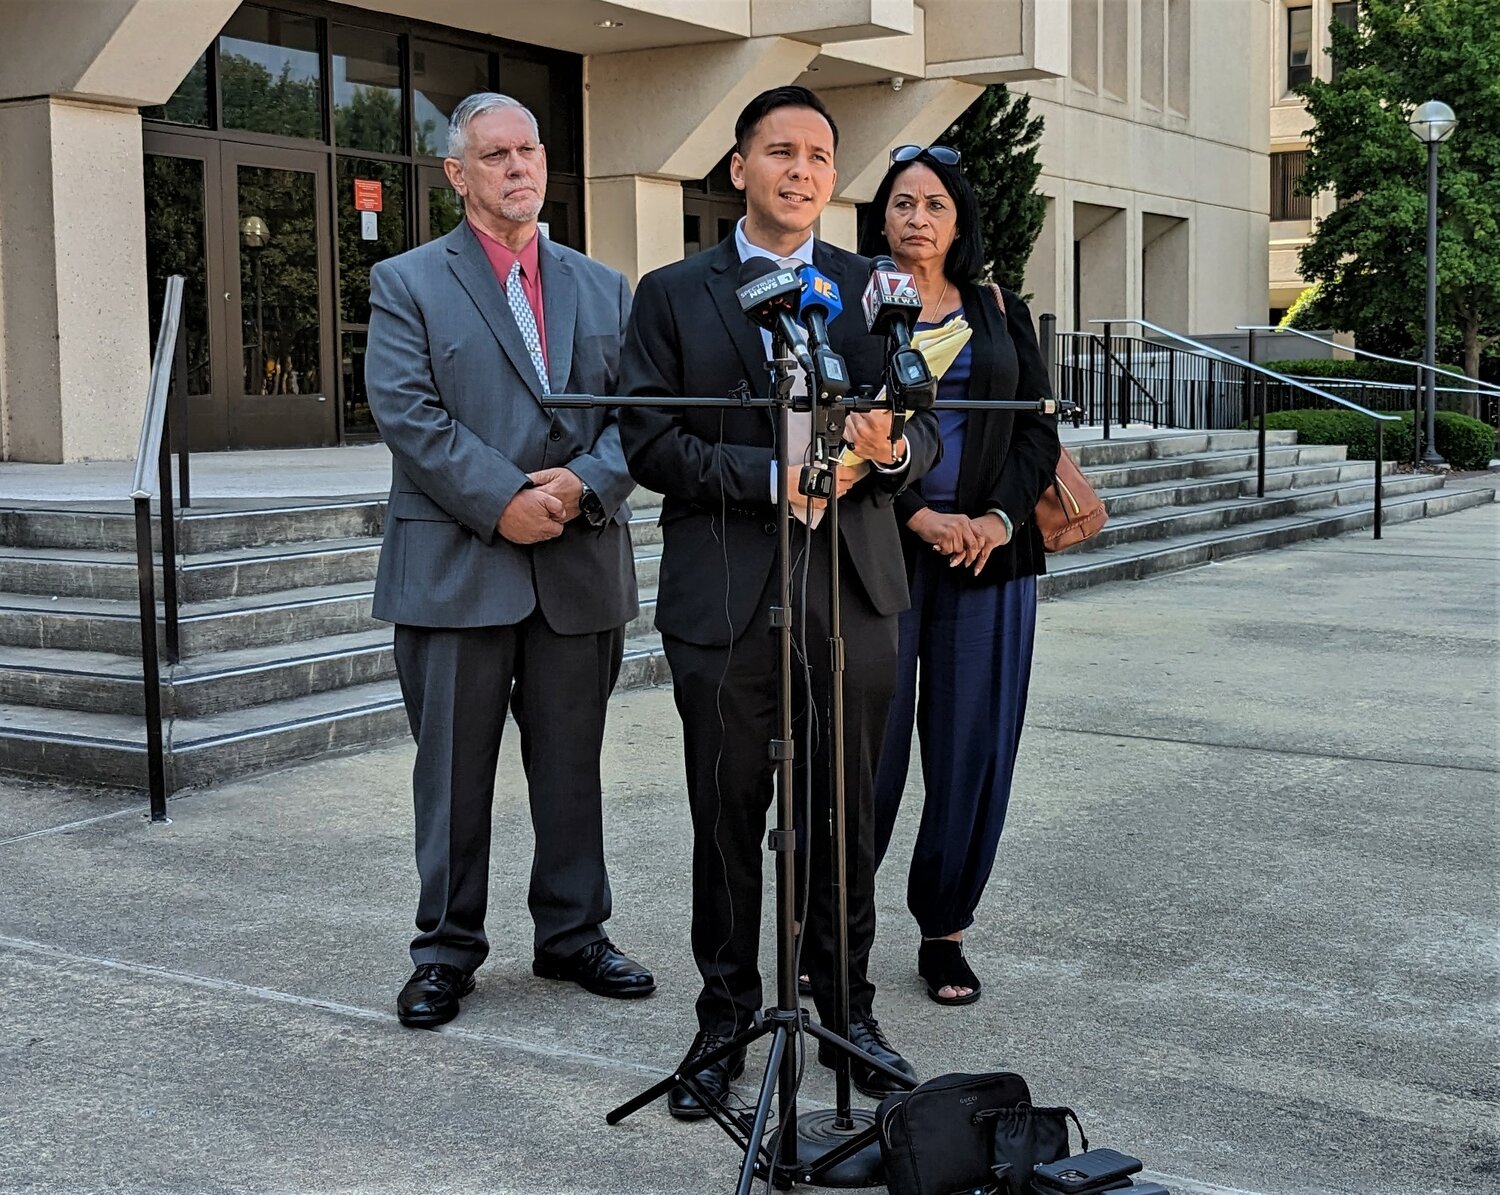 Xavier de Janon, a lawyer representing Rick and Maria Iwanski, speaks to reporters Wednesday following the N.C. Department of Justice’s decision not to charge police officers who killed Jada Johnson. Johnson’s grandparents, The Iwanskis stand behind de Janon.